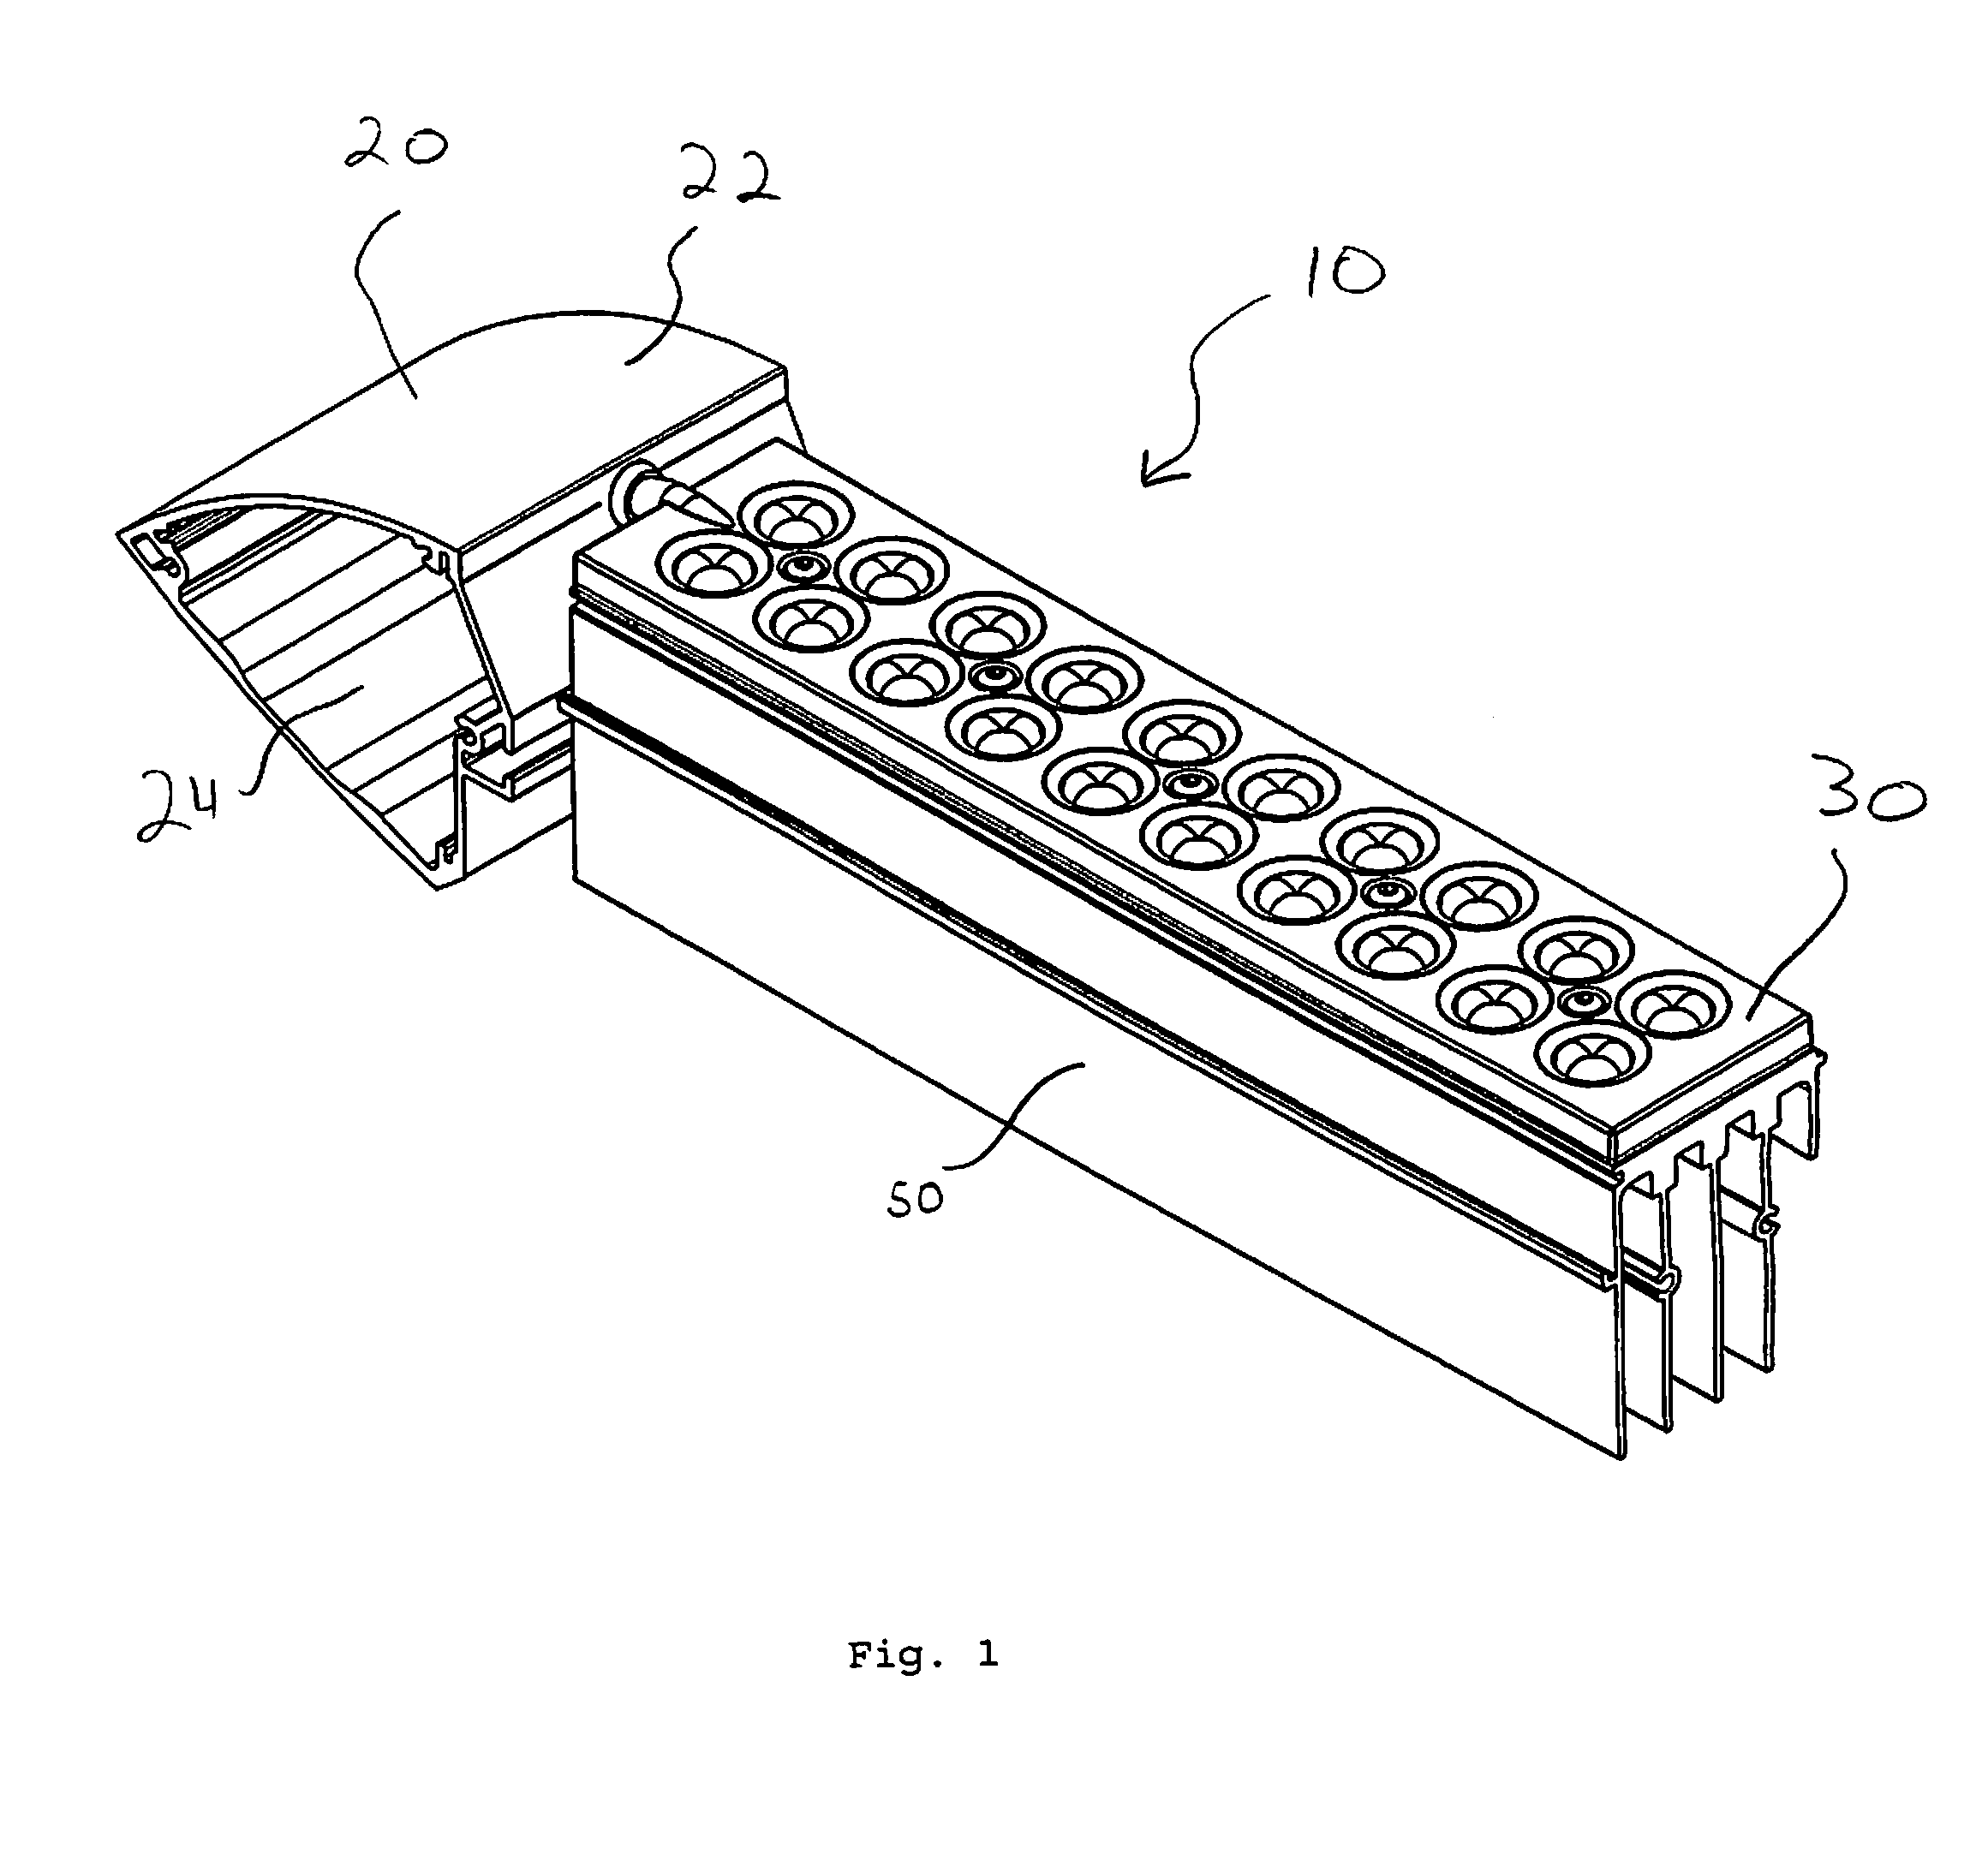 Multi-LED light fixture with secure arrangement for LED-array wiring